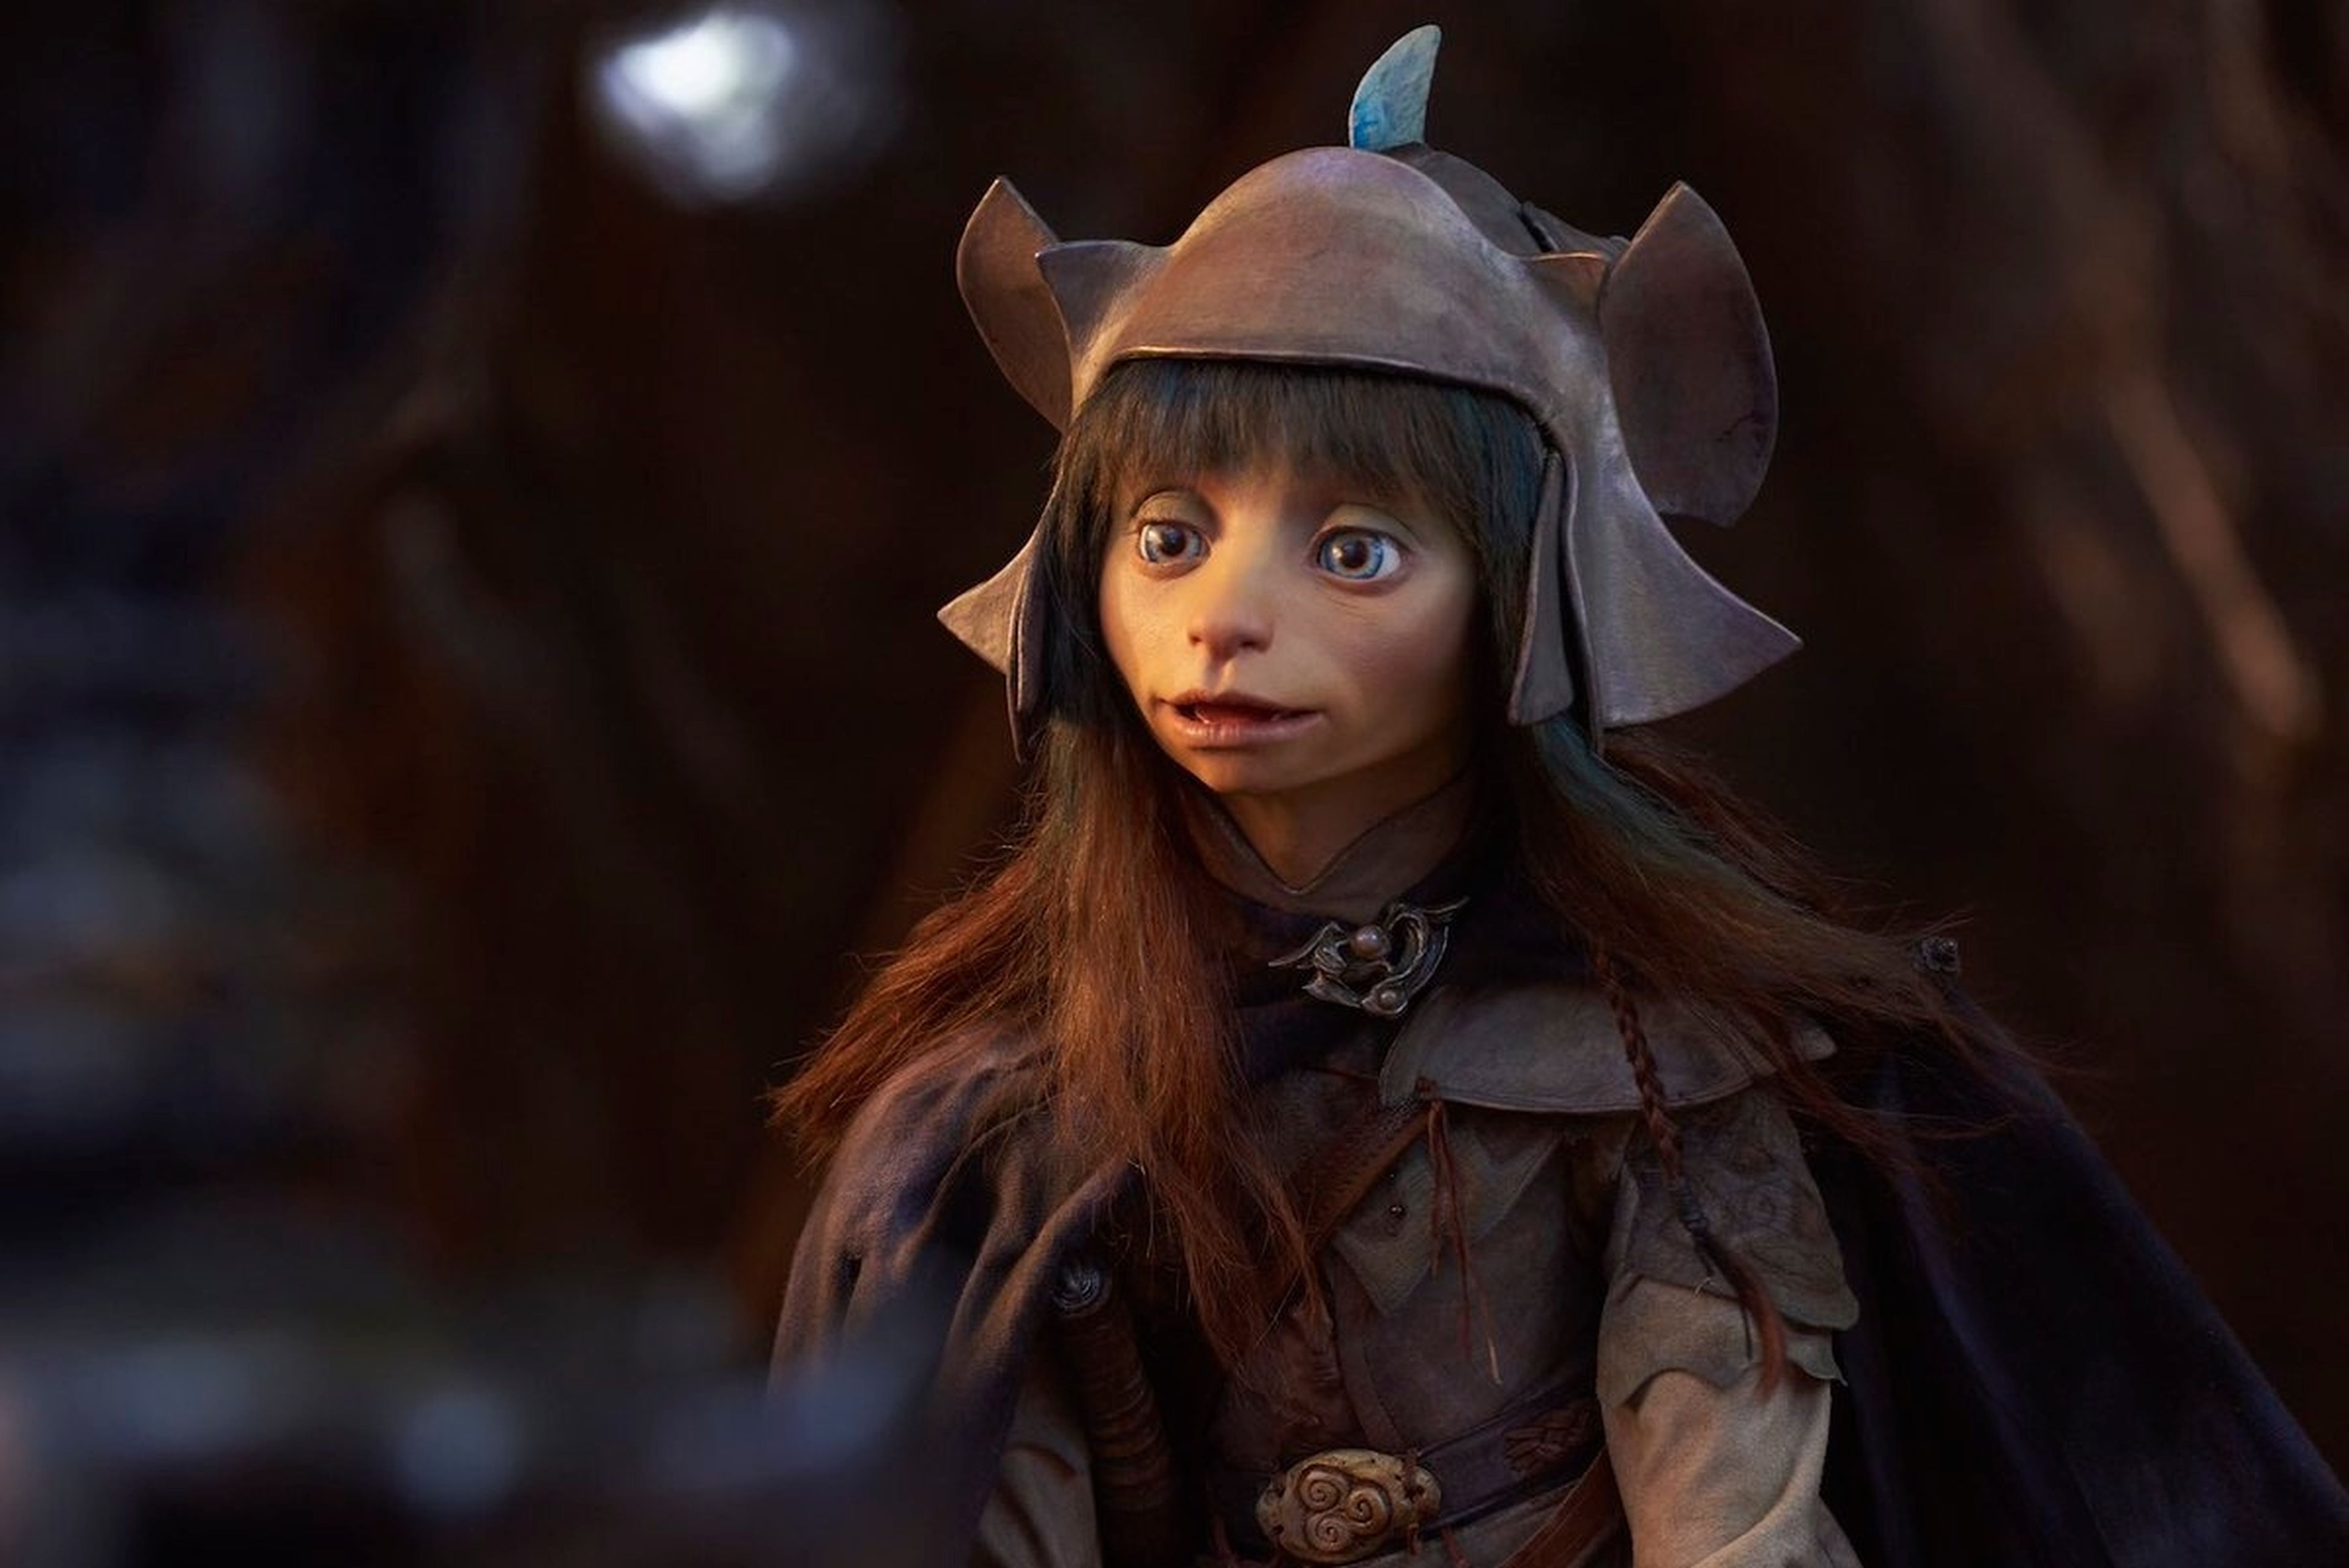 The Dark Crystal: Age of Resistance - Rian